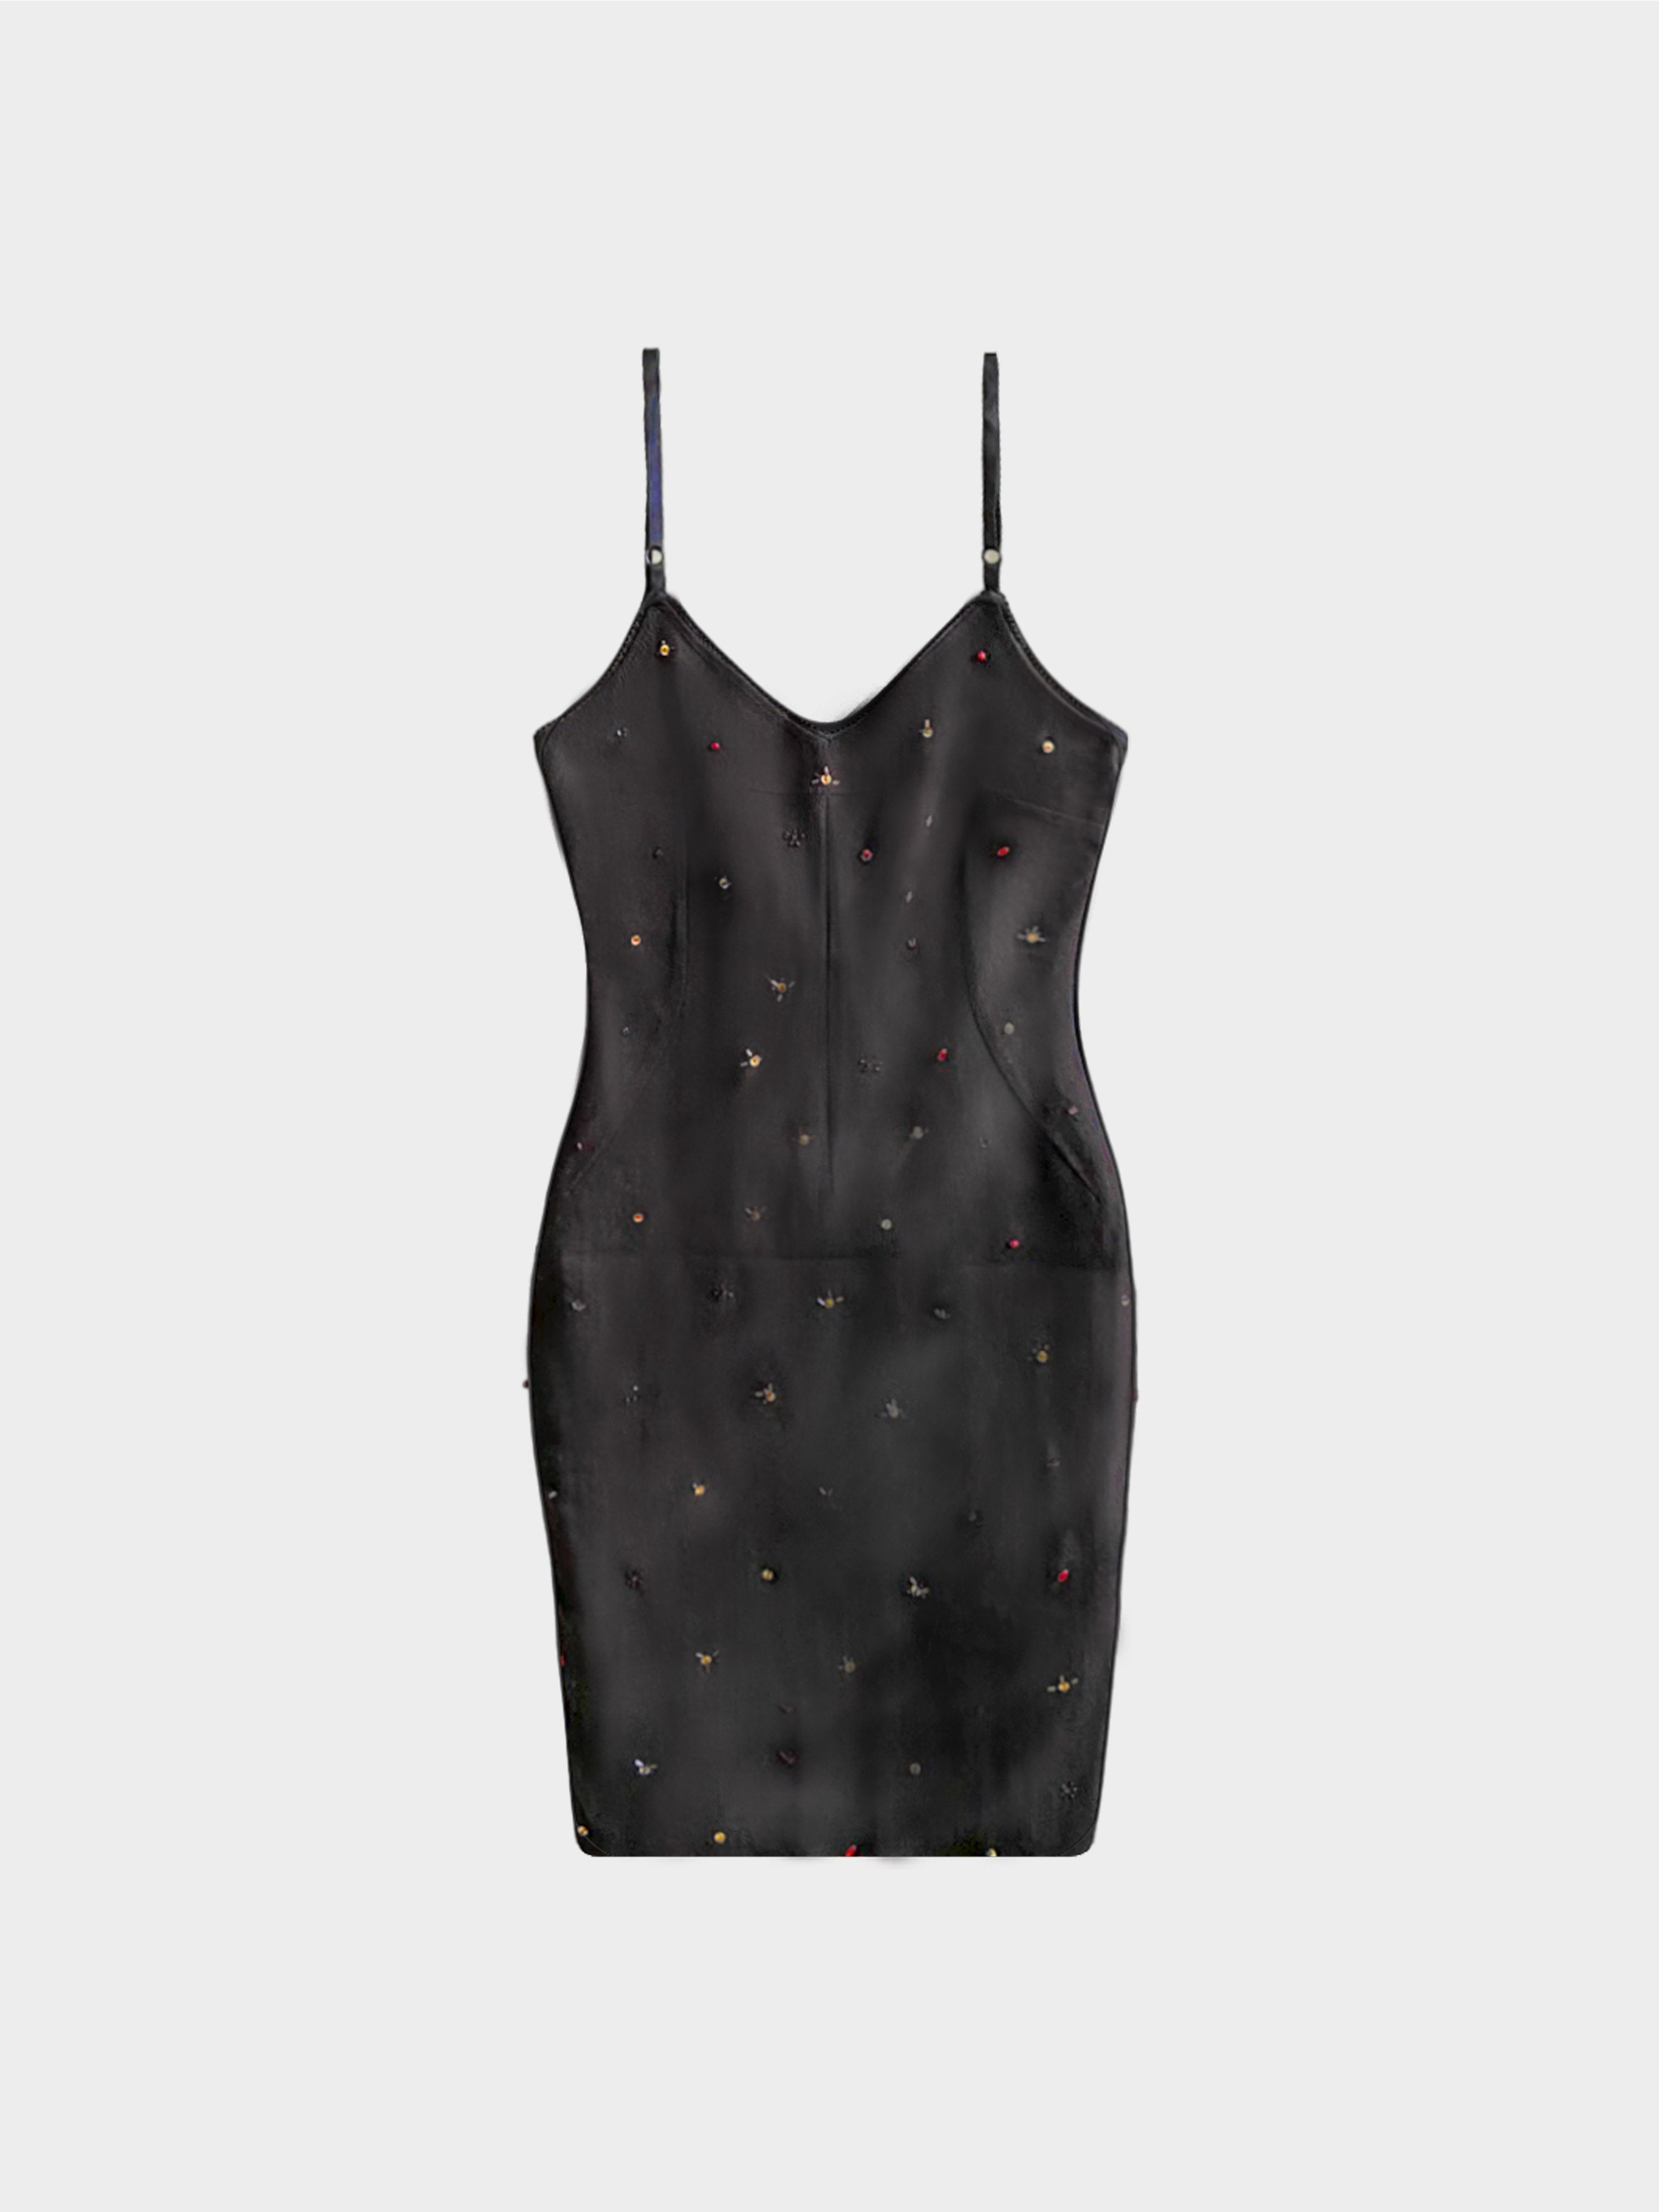 Dolce and Gabbana 2000s Dark Grey Bead and Sequin Embellished Wool Dress